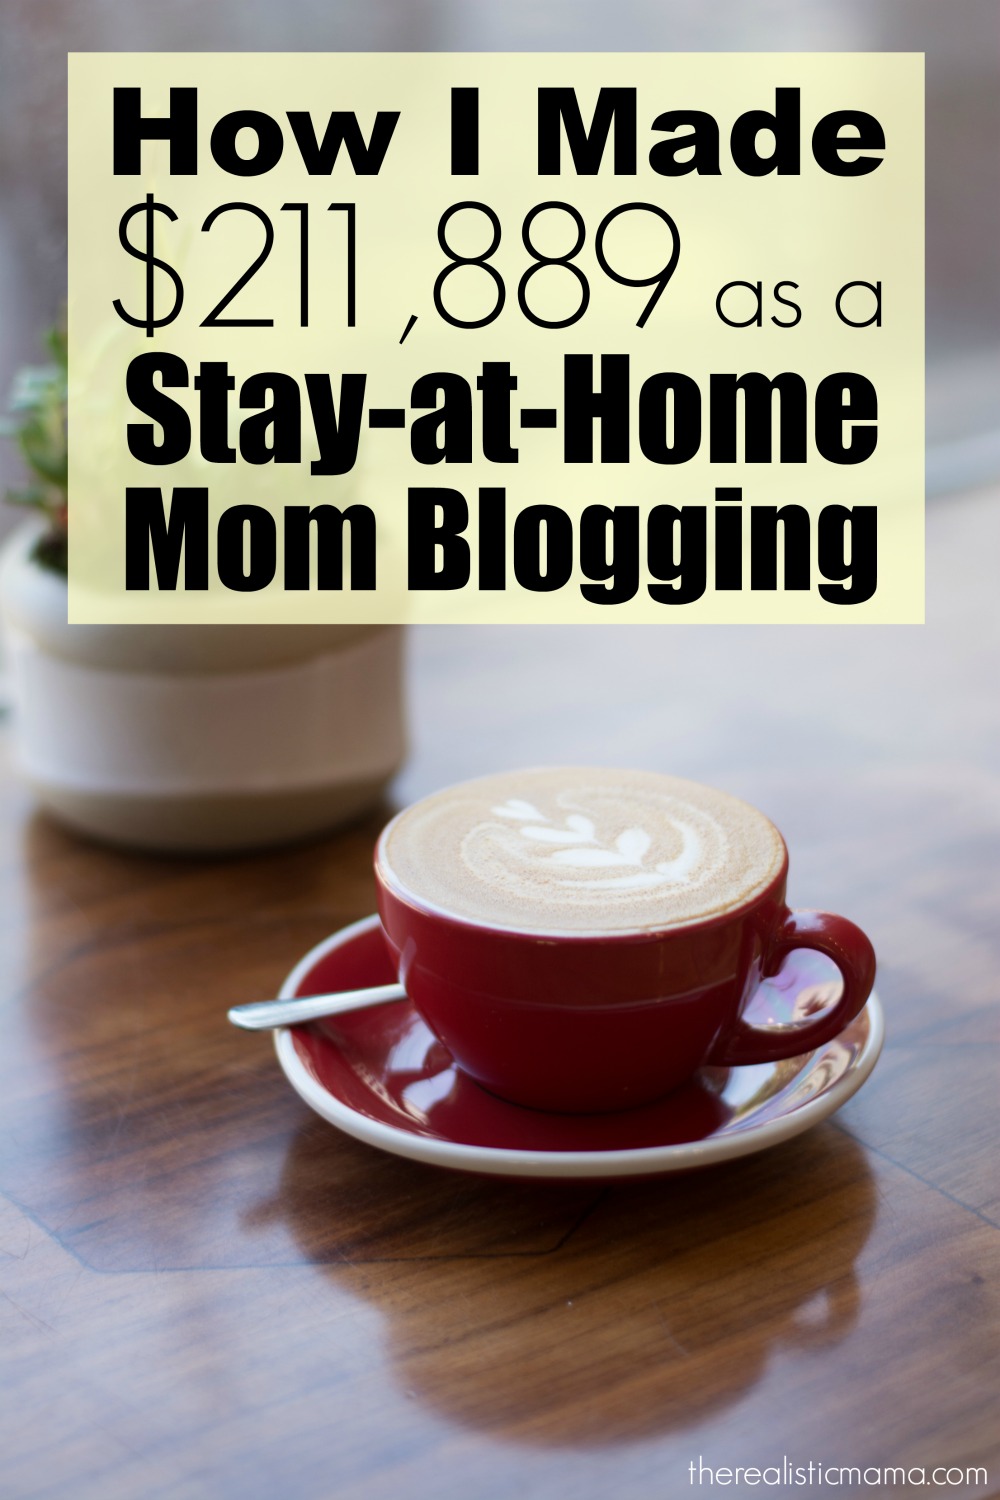 How I Made $211,889 as a Stay-at-Home Mom Blogging : How to Start a Blog